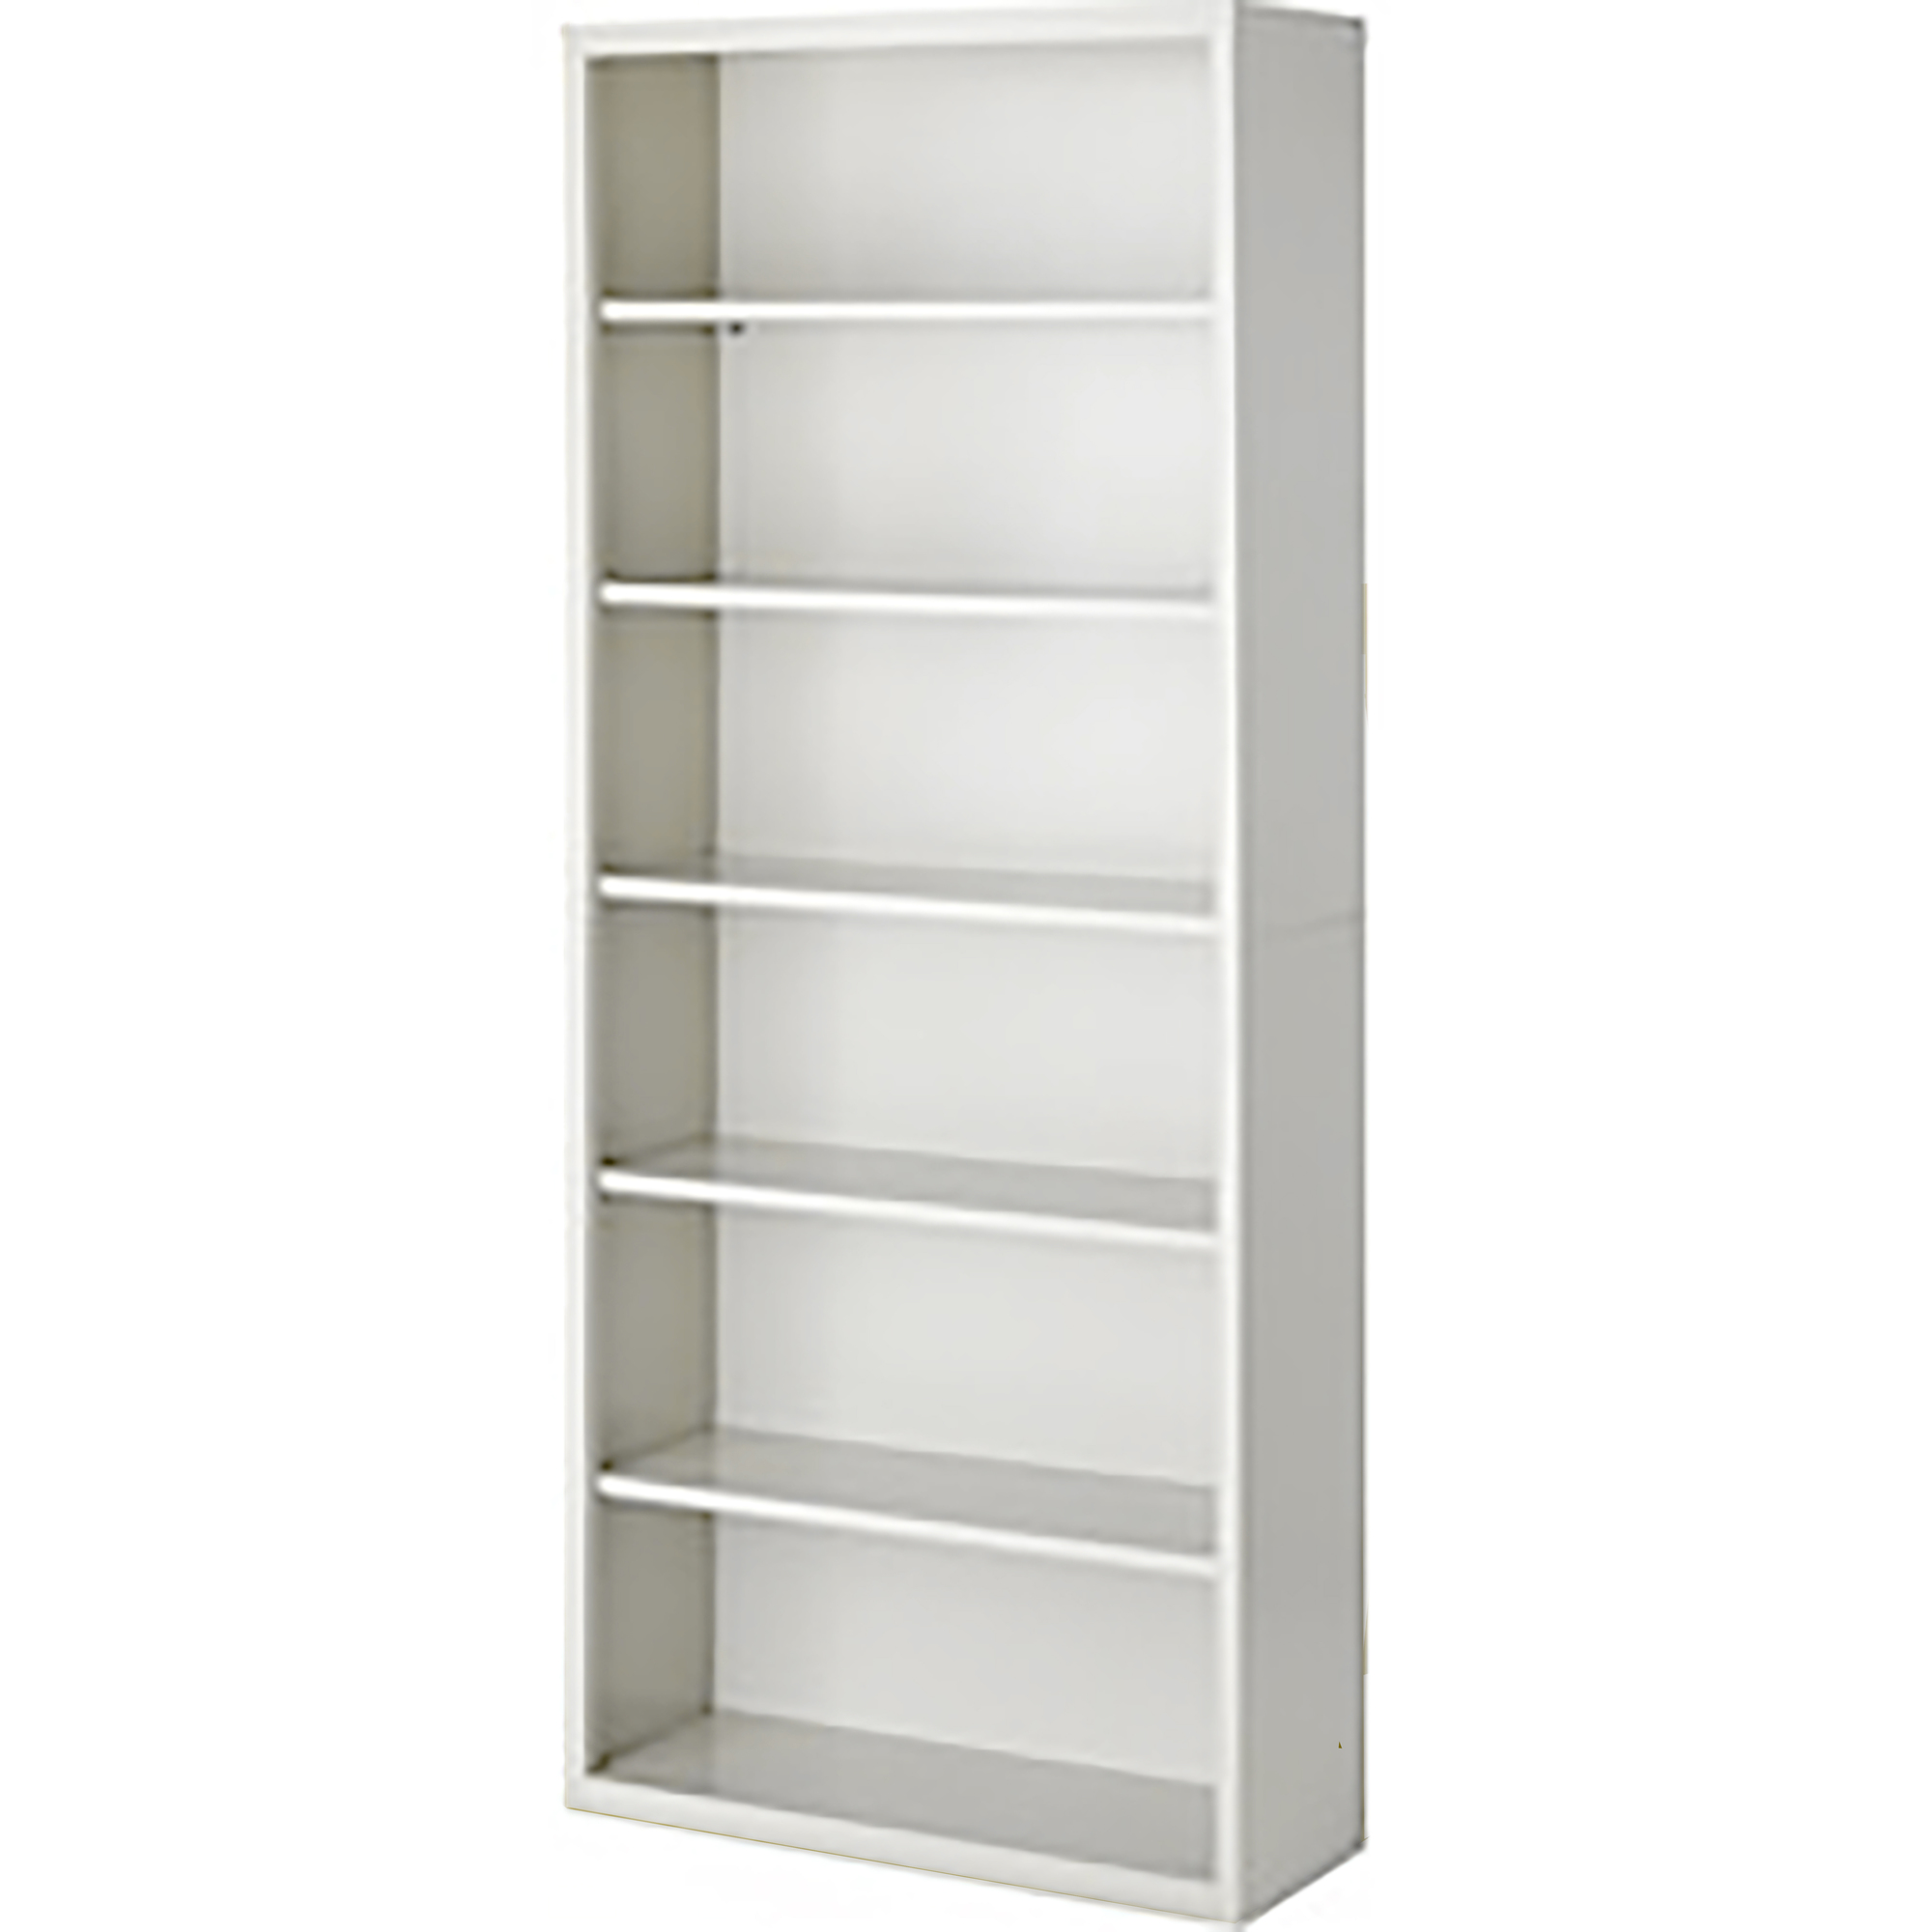 36Inchx18Inchx84Inch Putty Bookcase Steel Fully Assembled, Height 84 in, Shelves (qty.) 6, Material Steel, Model - Steel Cabinets USA BCA-368418-P